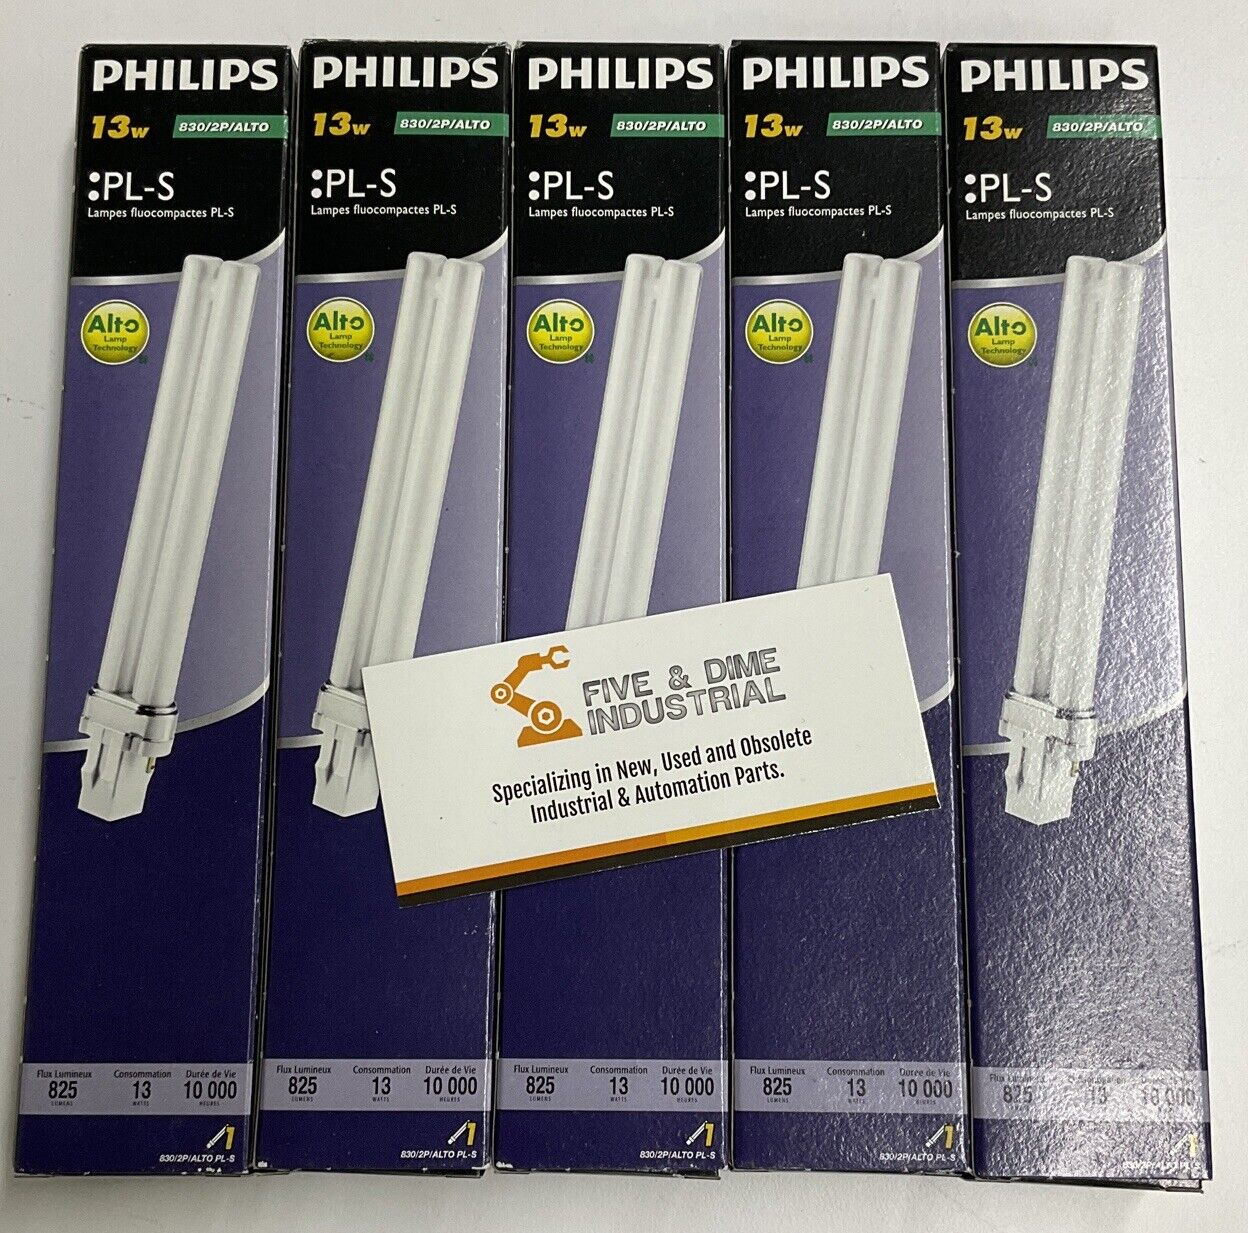 Philips 830/2P PL-S 13W 5 Pack Compact Fluorescent Lamps GX23 3000K (YE271)